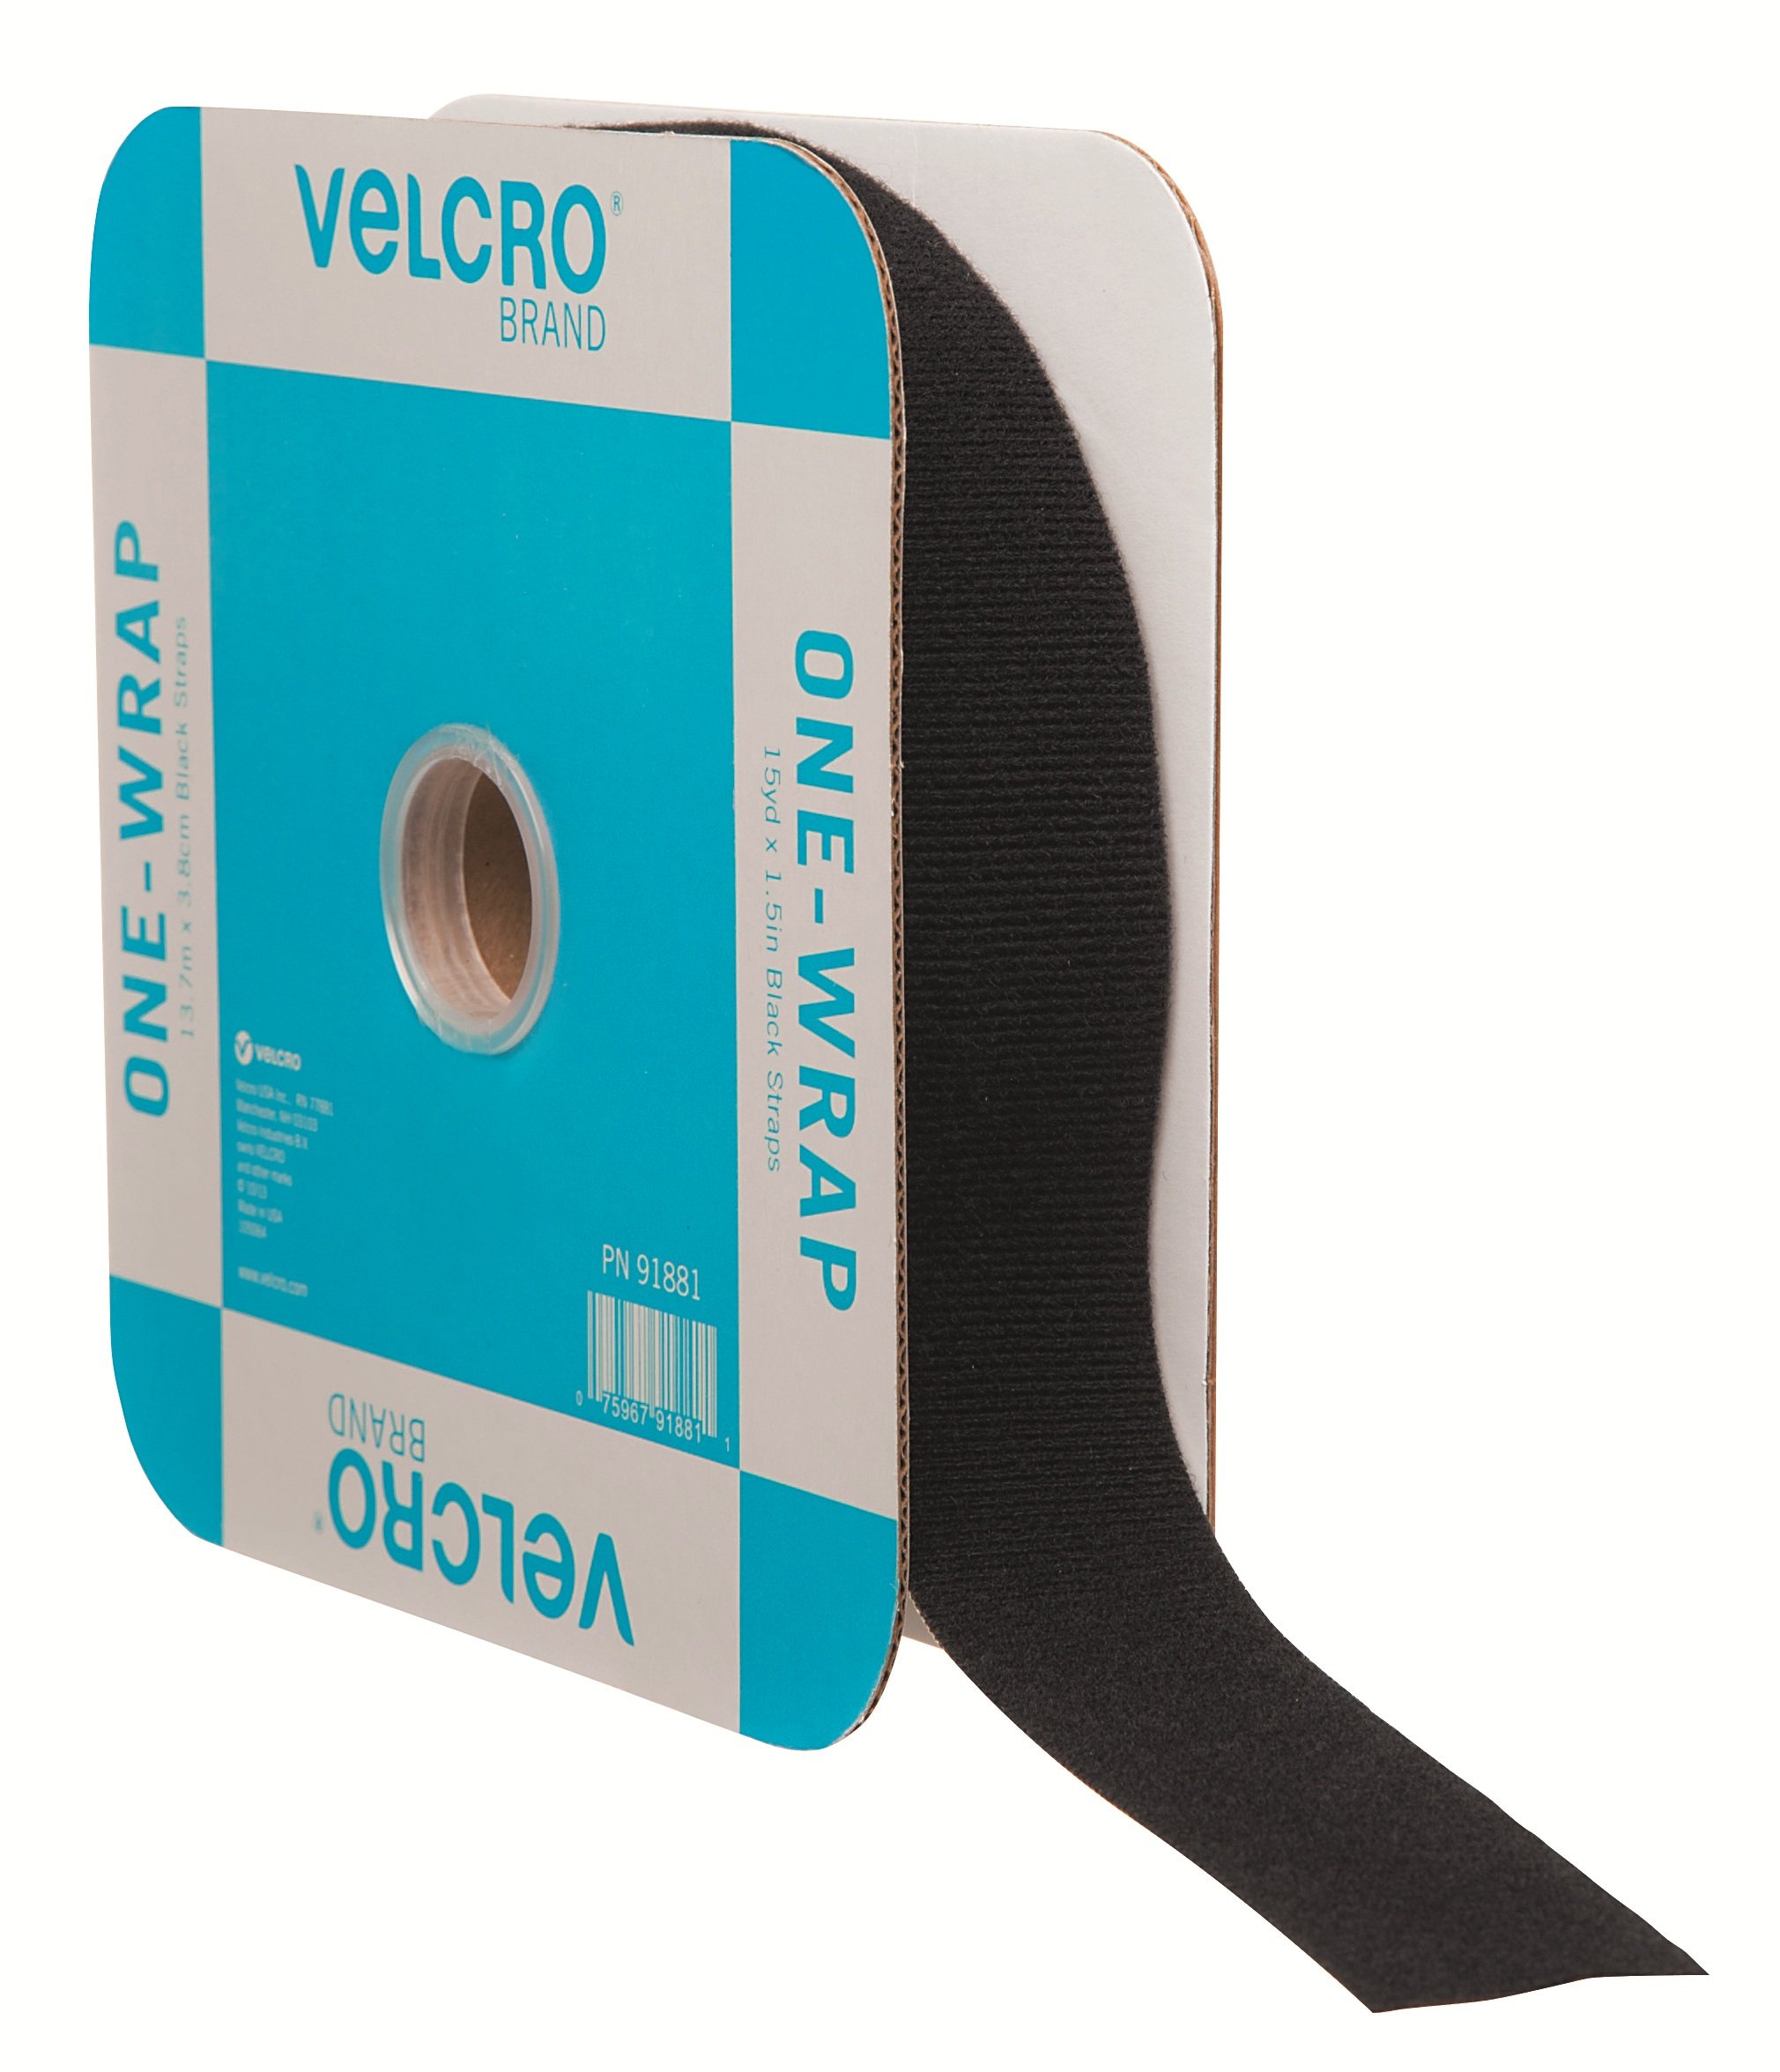  VELCRO Brand ONE WRAP Thin Ties, Strong & Reusable, Perfect  for Fastening Wires & Organizing Cords, Black/Gray, 15in x 1/2-Inch